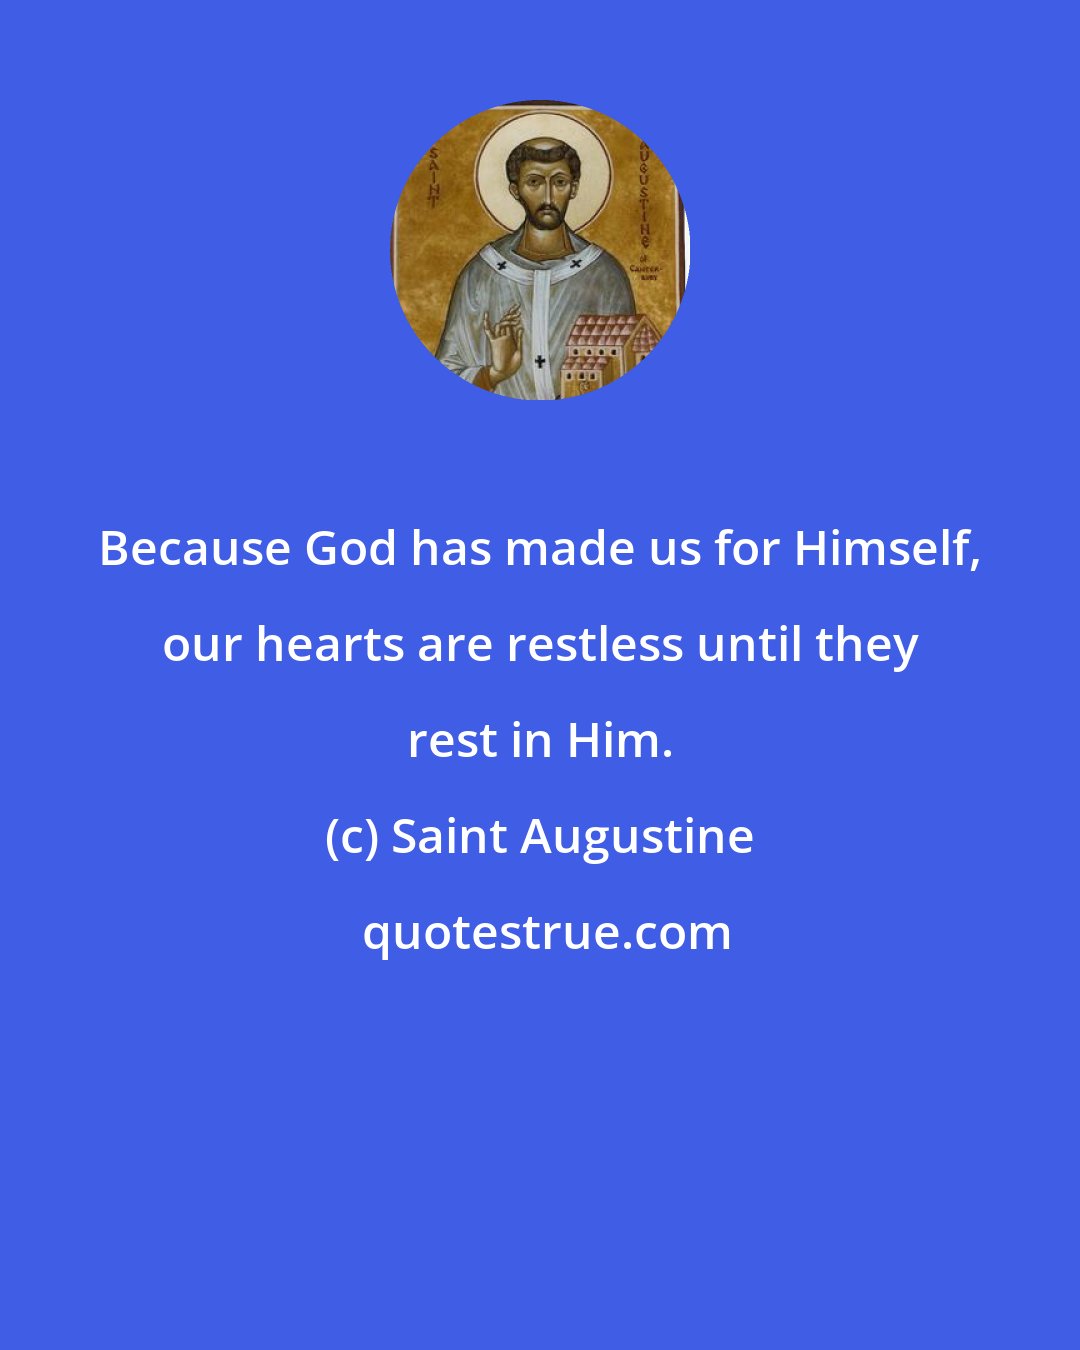 Saint Augustine: Because God has made us for Himself, our hearts are restless until they rest in Him.